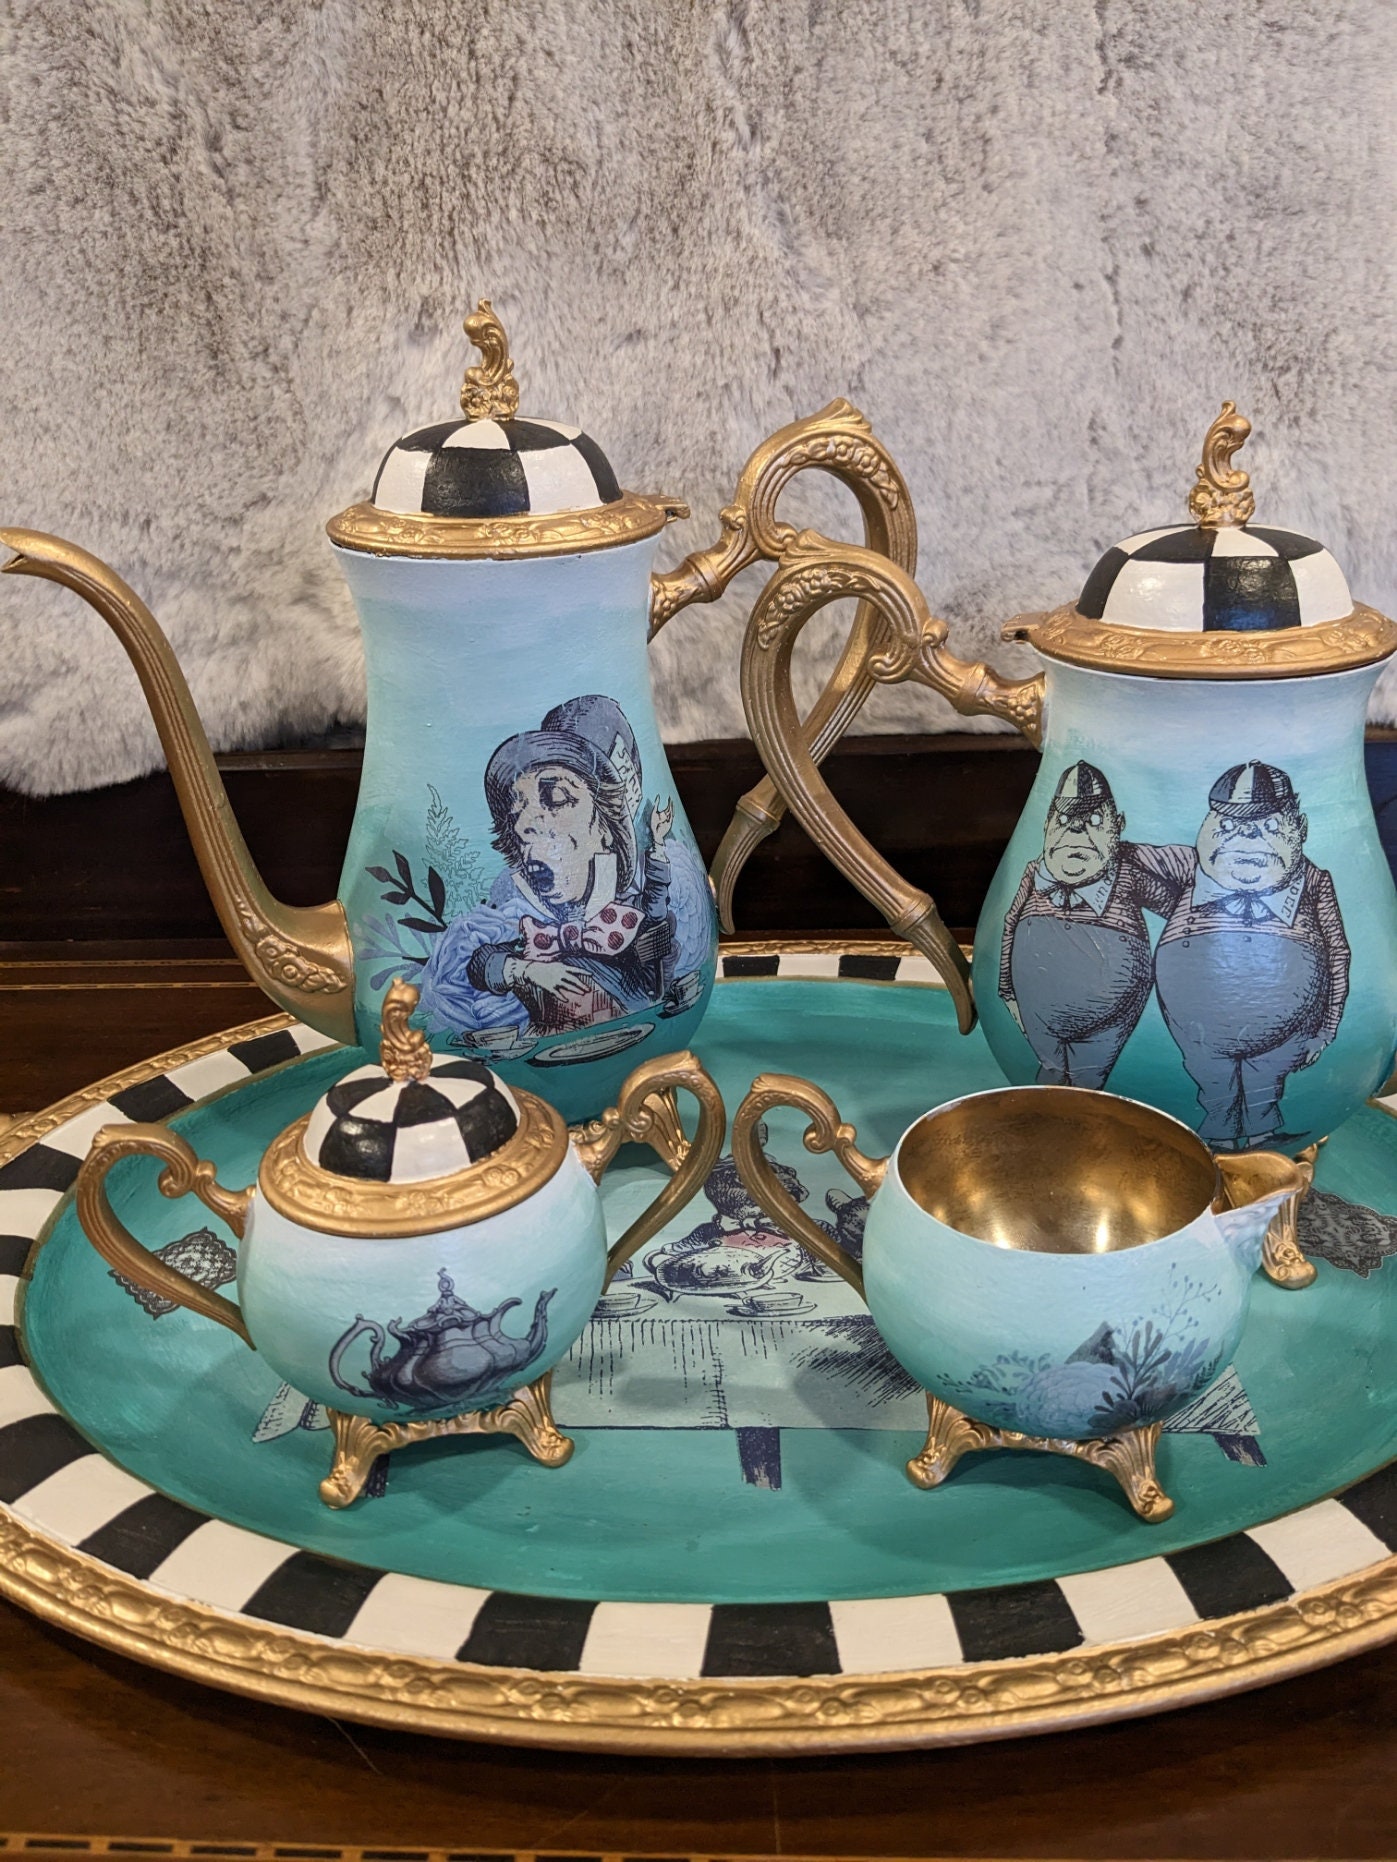 Whimsical Animal Teapot and Teacup Sets - Fèves - 12th Scale